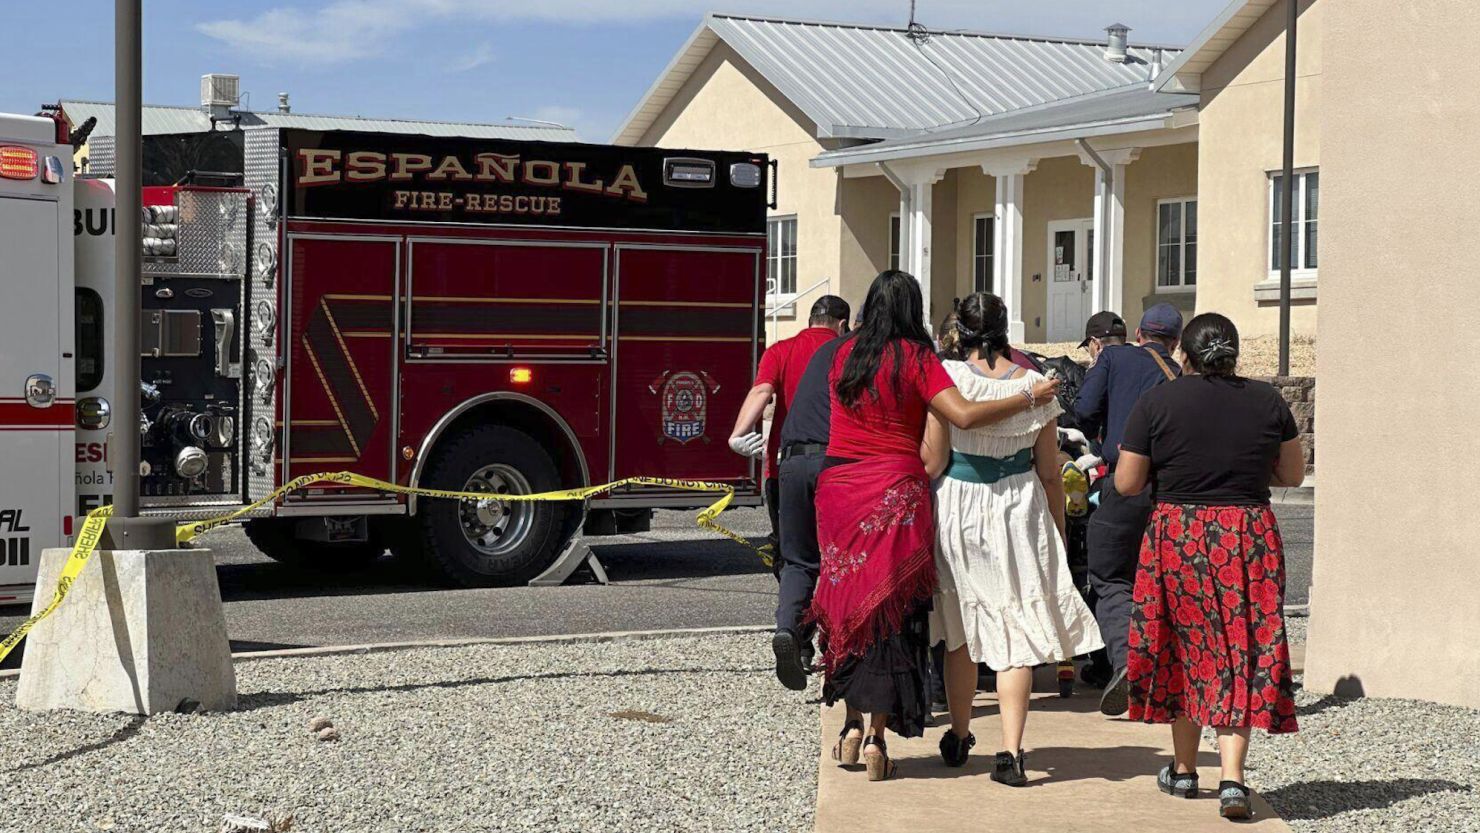 First responders arrive at the scene of a shooting Thursday, Sept. 28, 2023, in Española, N.M., where a protest over a statue of Spanish conquistador Juan de Oñate turned violent. A suspect was taken into custody after allegedly shooting and wounding a man at the protest Thursday, authorities said. (Luis Sánchez Saturno/Santa Fe New Mexican via AP)